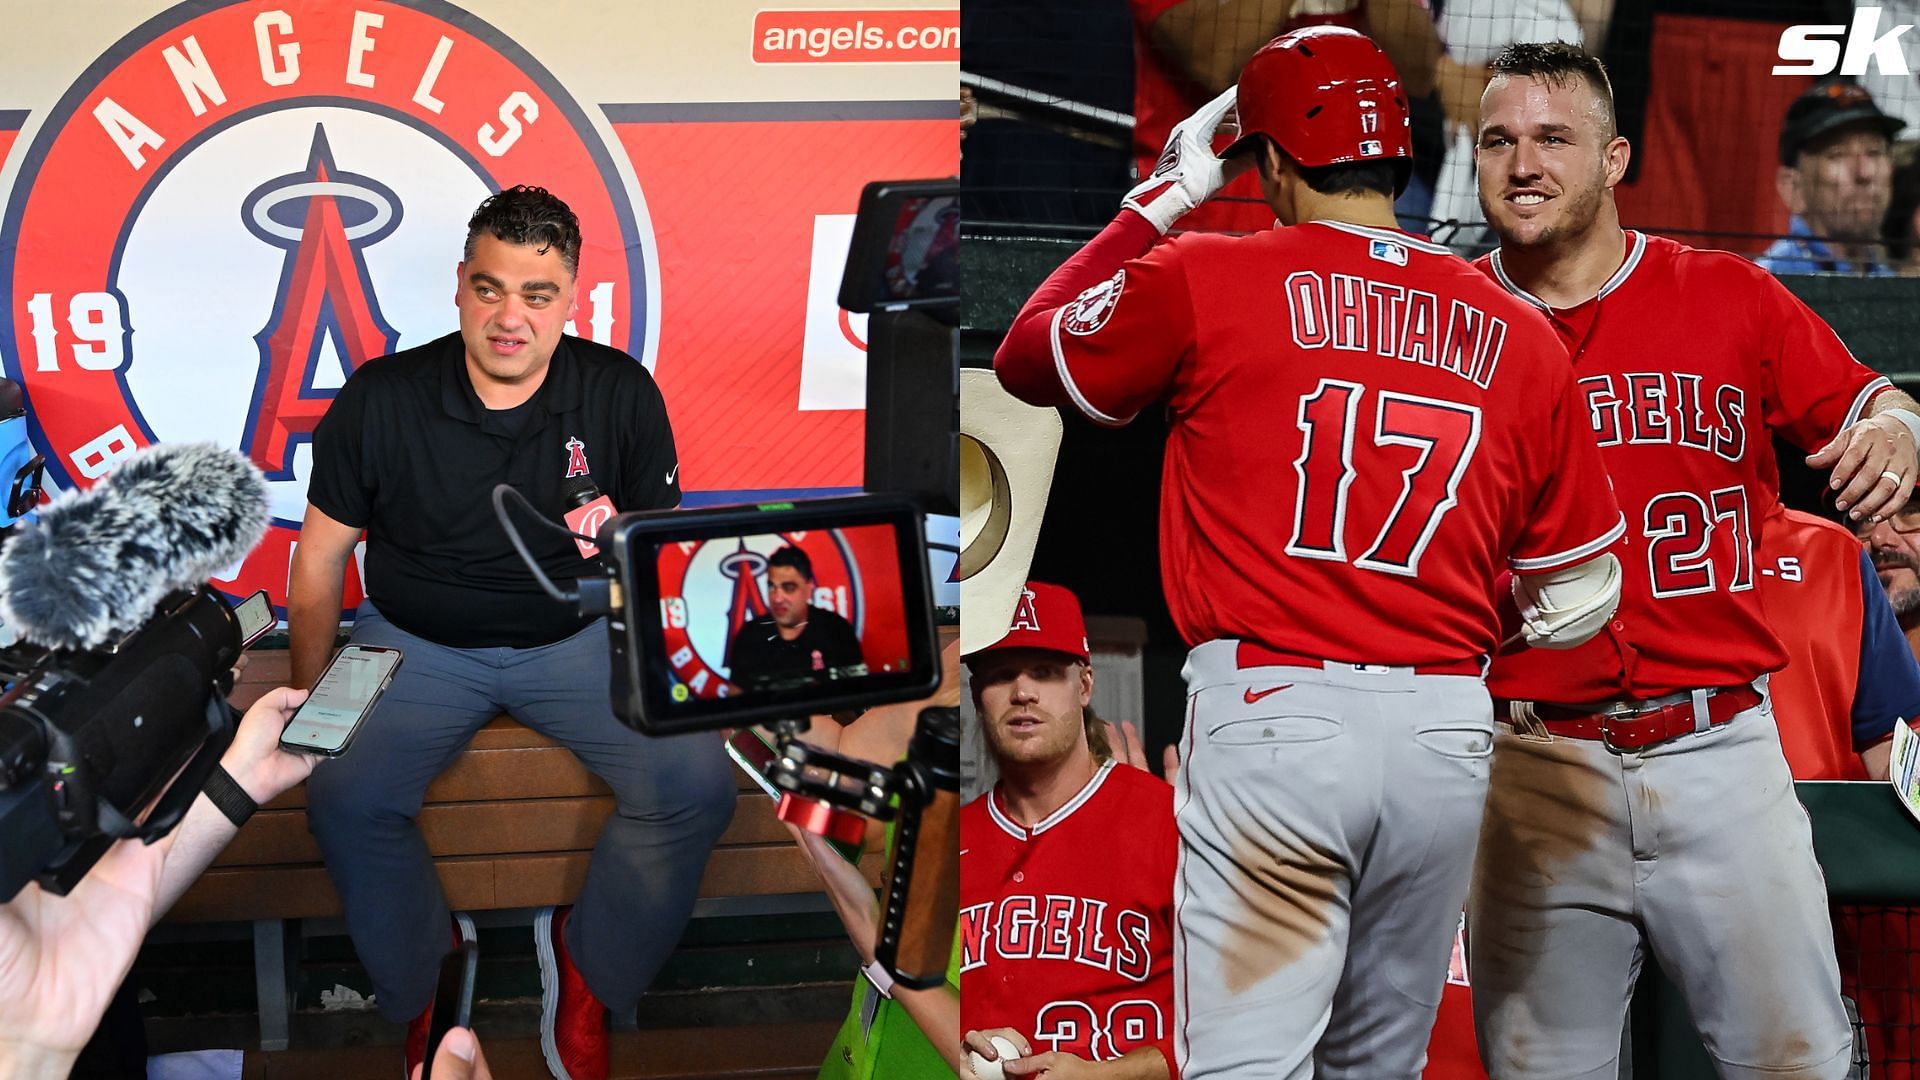 Perry Minasian, Shohei Ohtani and Mike Trout of the LA Angels